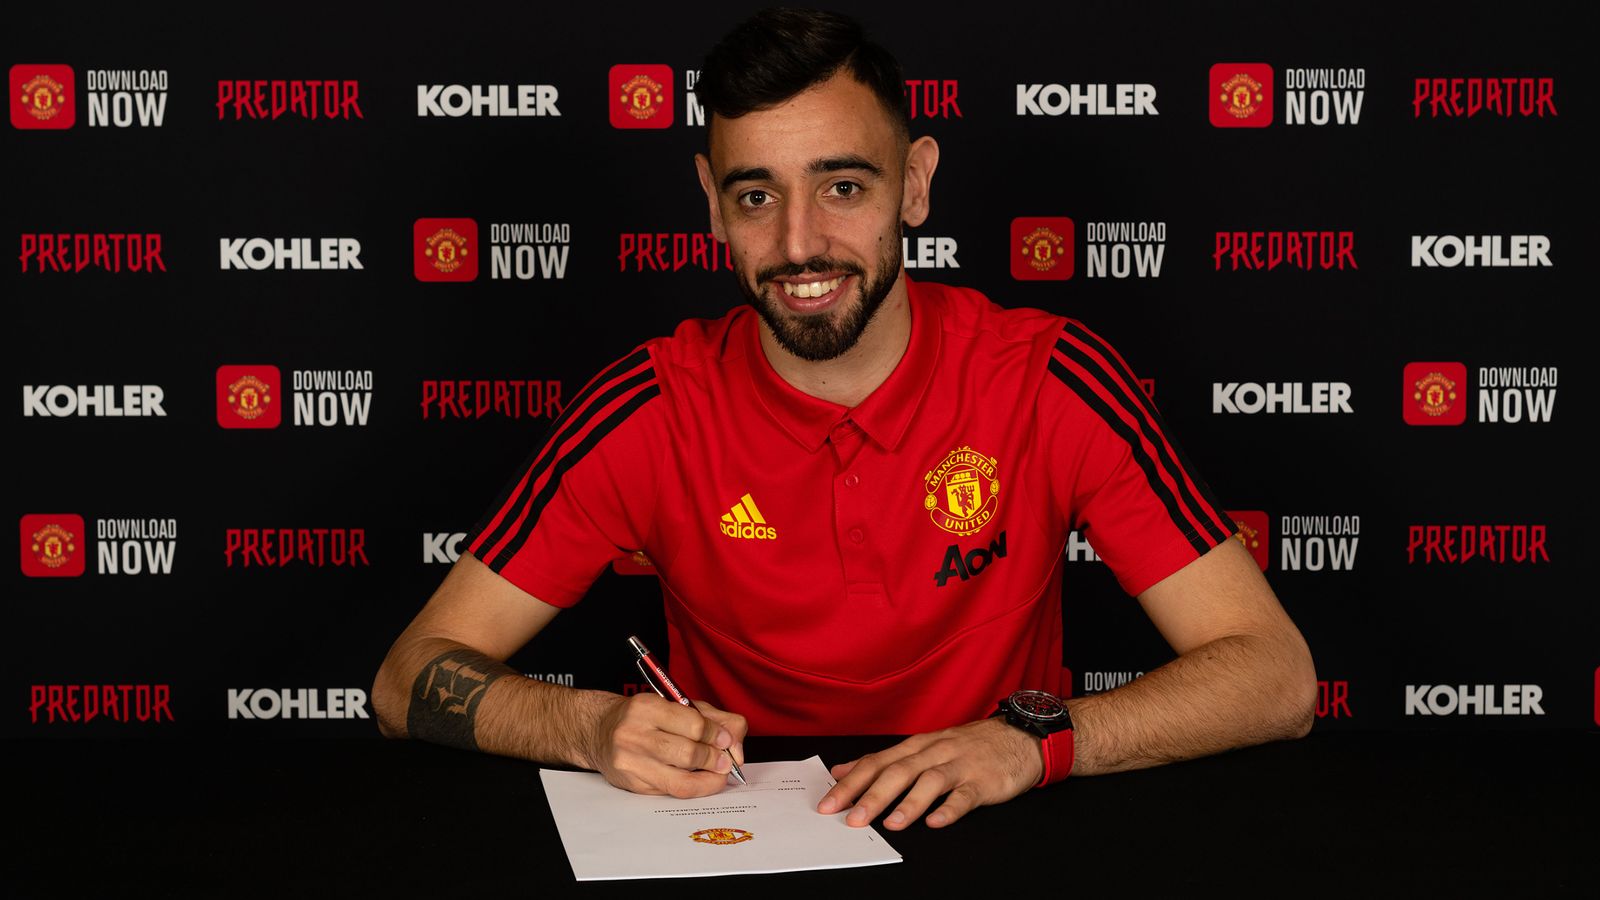 Bruno Fernandes - Bruno Fernandes Manchester United Wallpapers - Top Free ... / View the player profile of bruno fernandes (manchester utd) on flashscore.com.